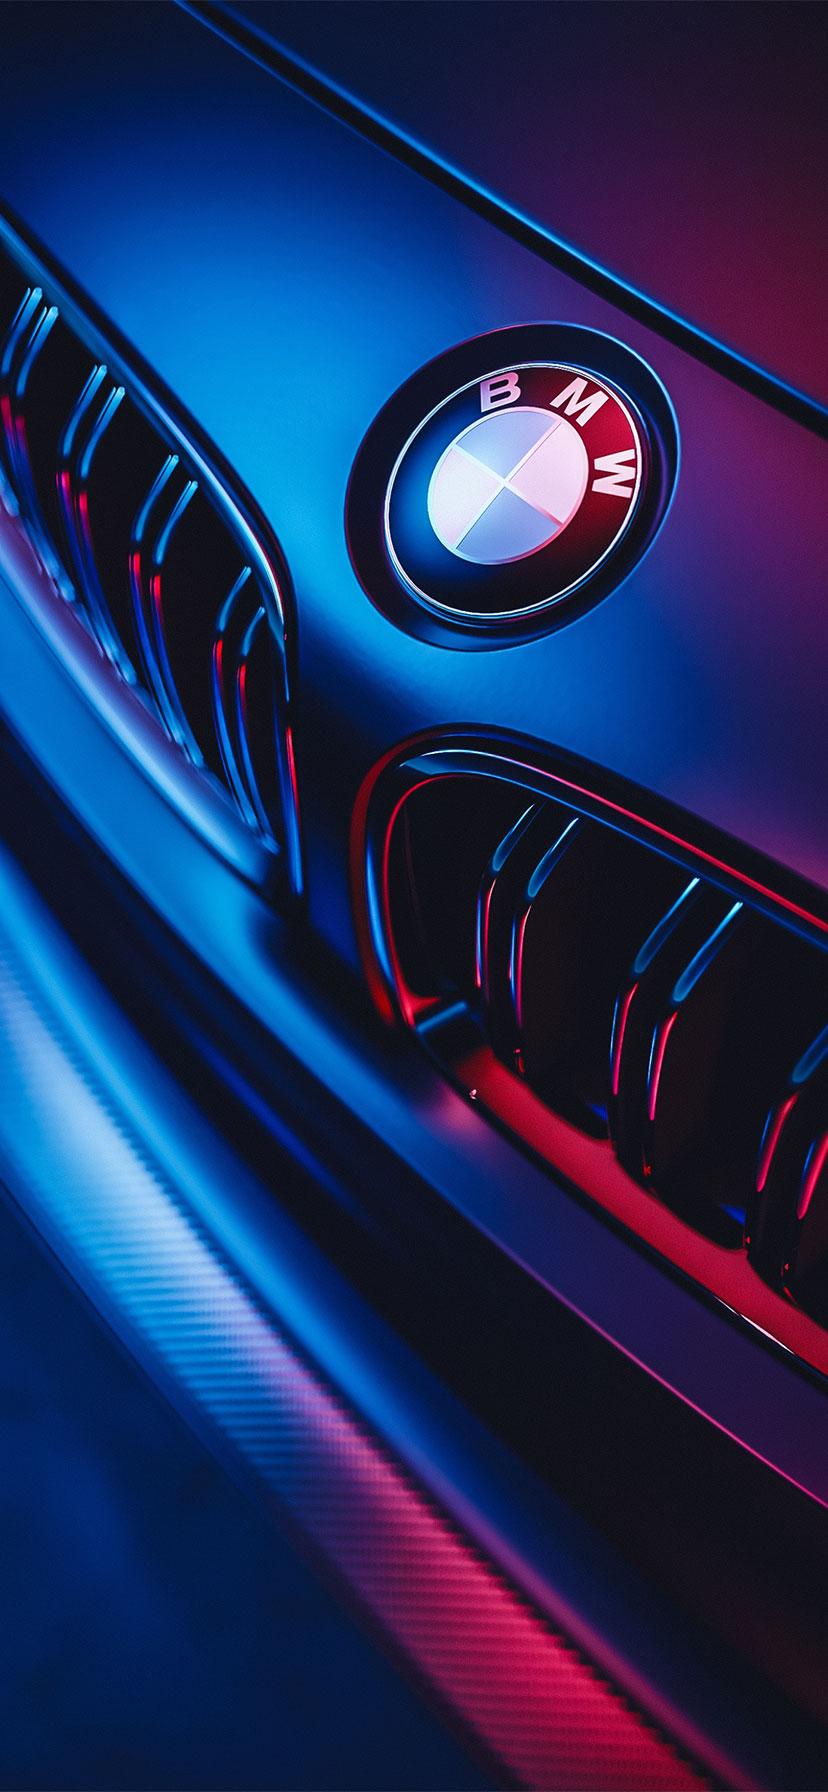 Car Wallpaper For Iphone 11 Pro Max